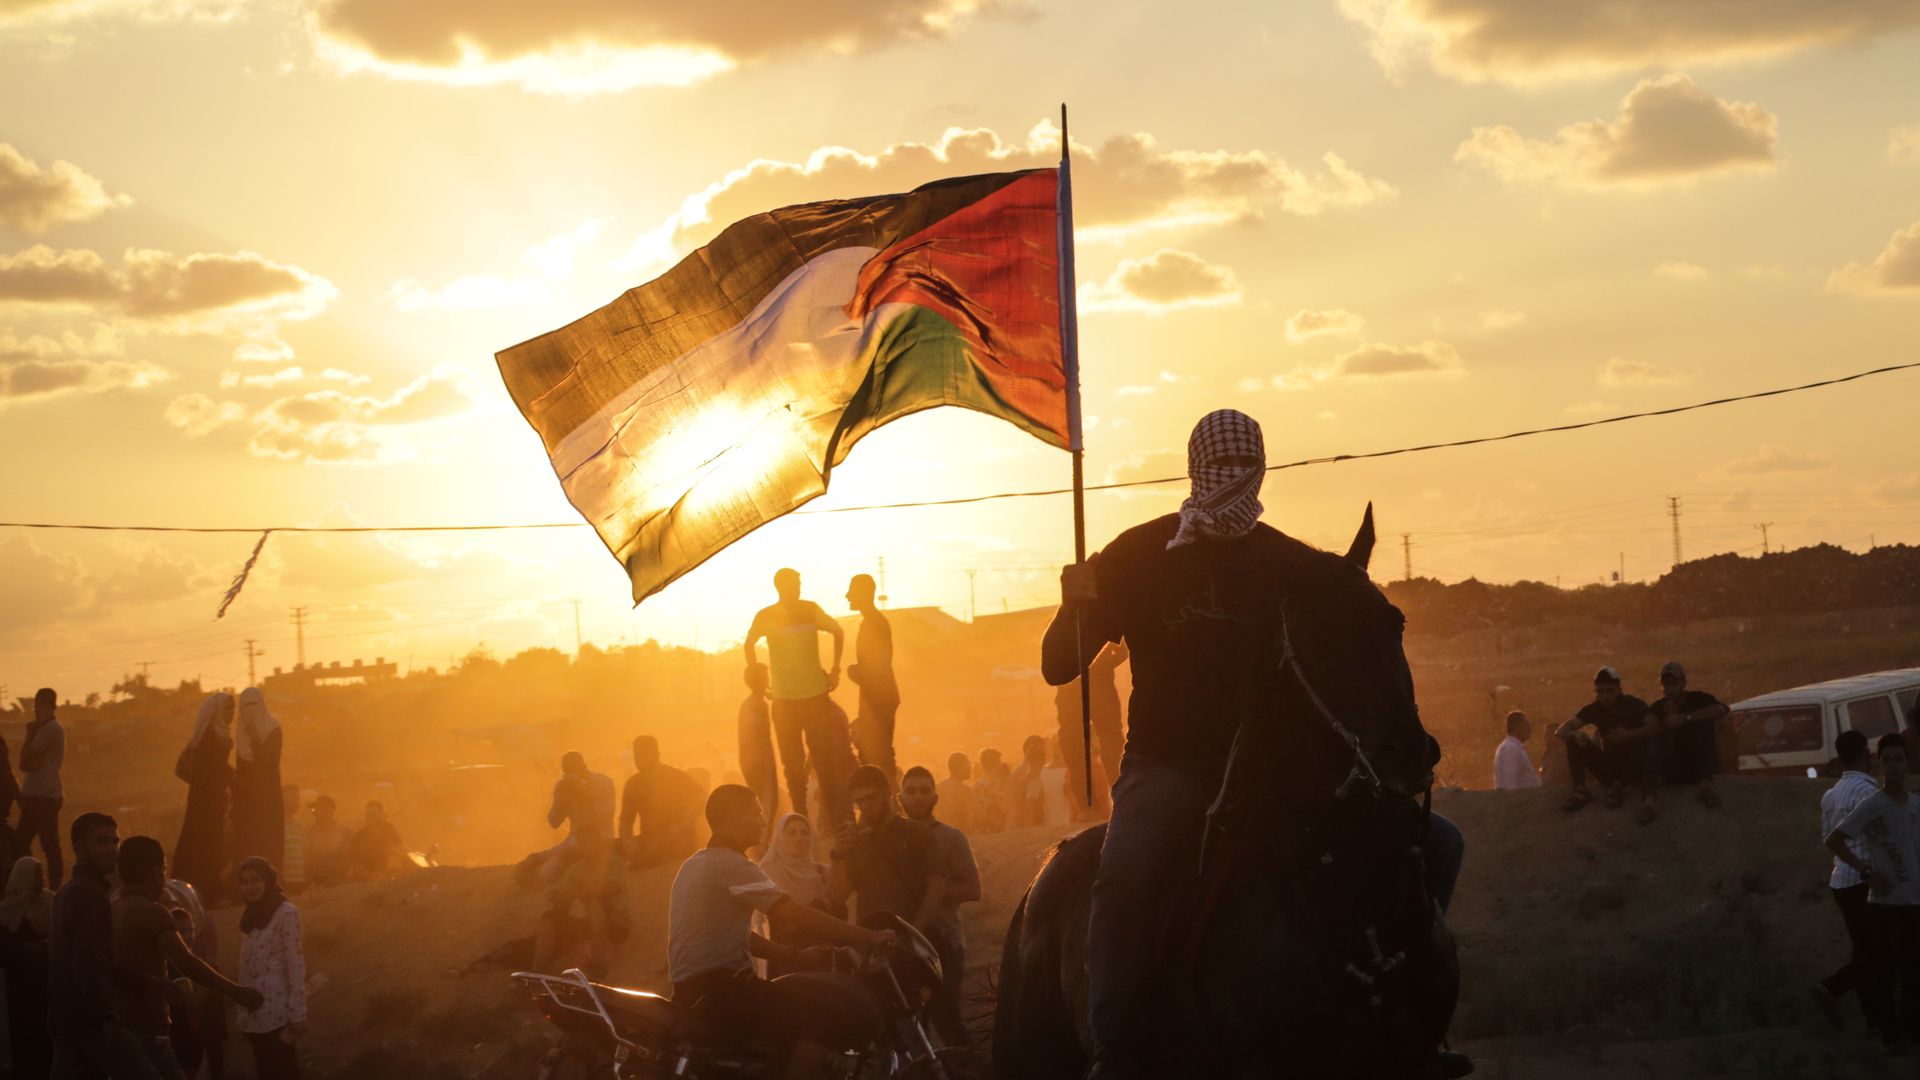 A Palestinian man riding a horse and waving a Palestinian flag during clashes between Palestinian protesters and the Israeli forces along the Israeli fence East of Gaza City.